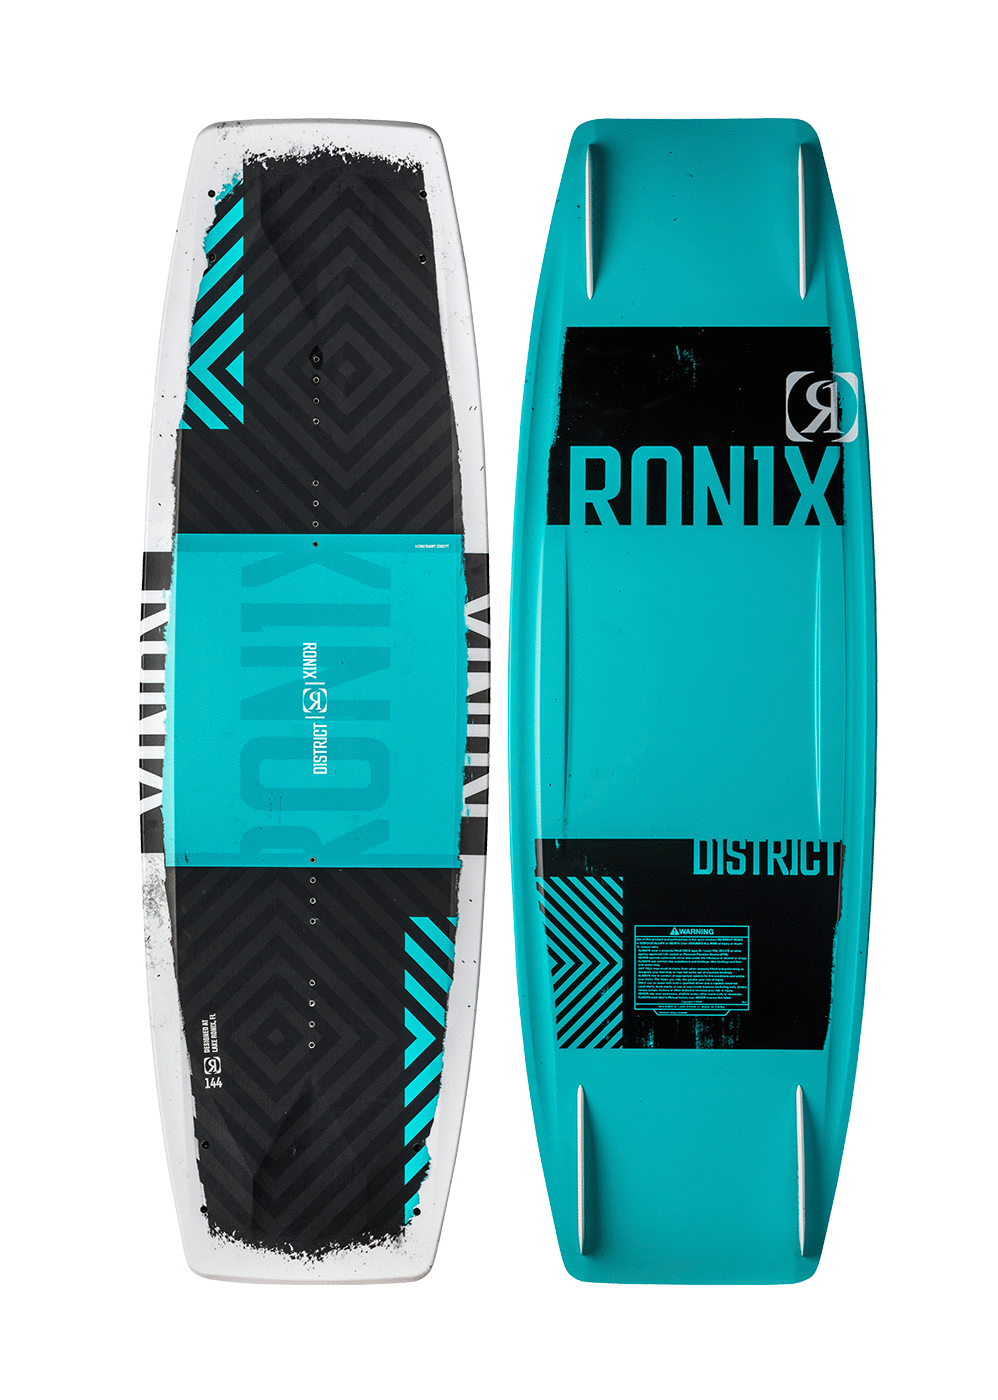 Men's Women's and Children's Wakeboards, Ronix Wakeboards